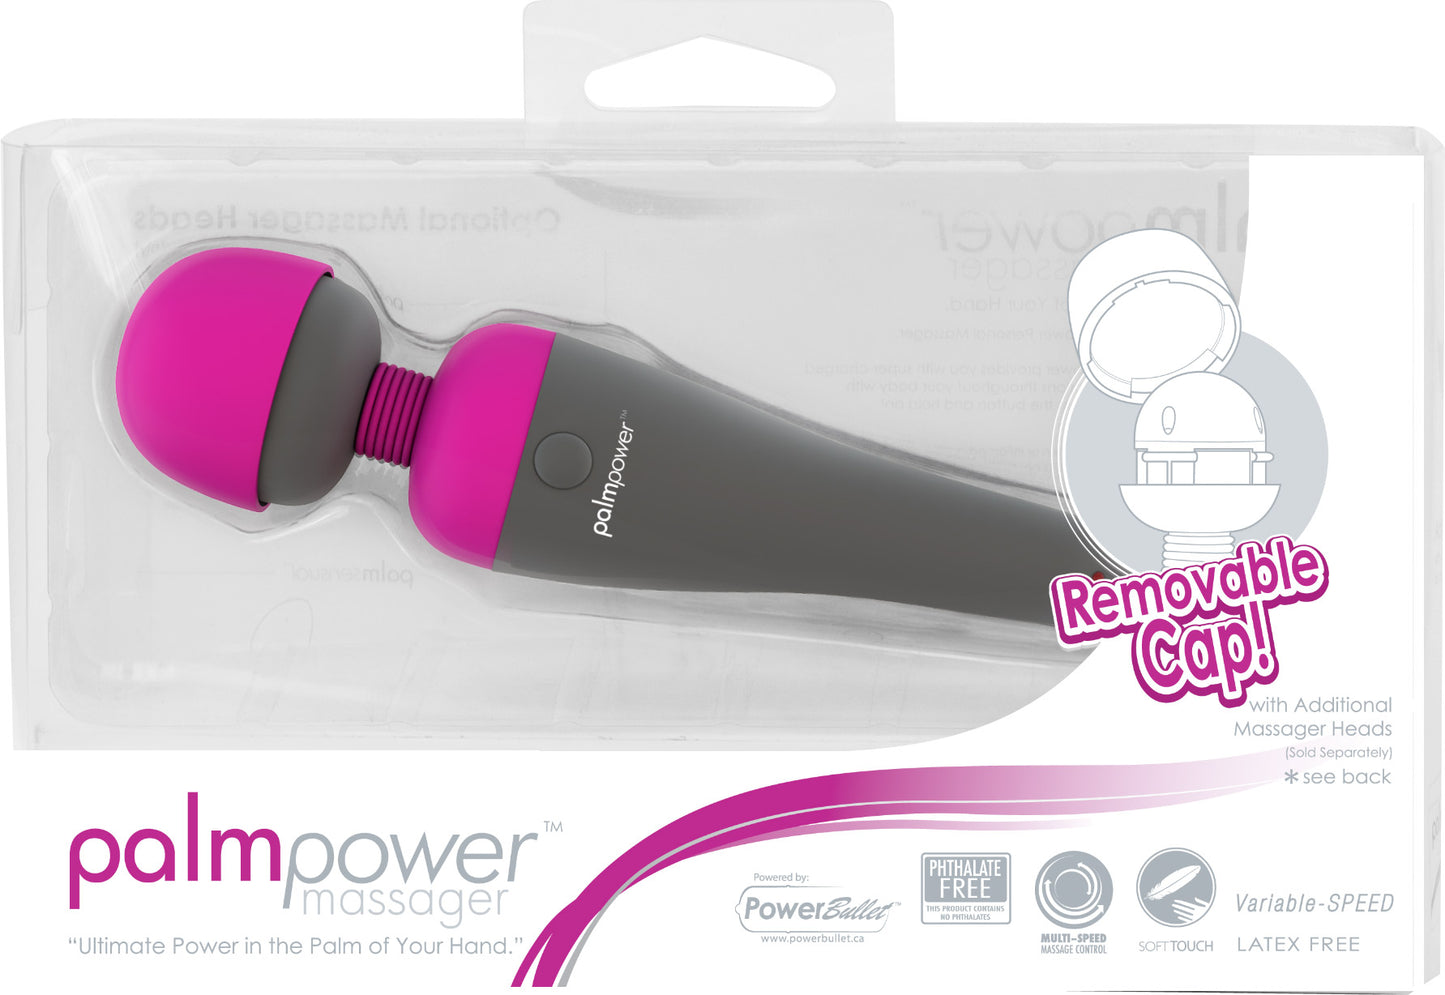 Palm Power Massager Fuschia - Just for you desires